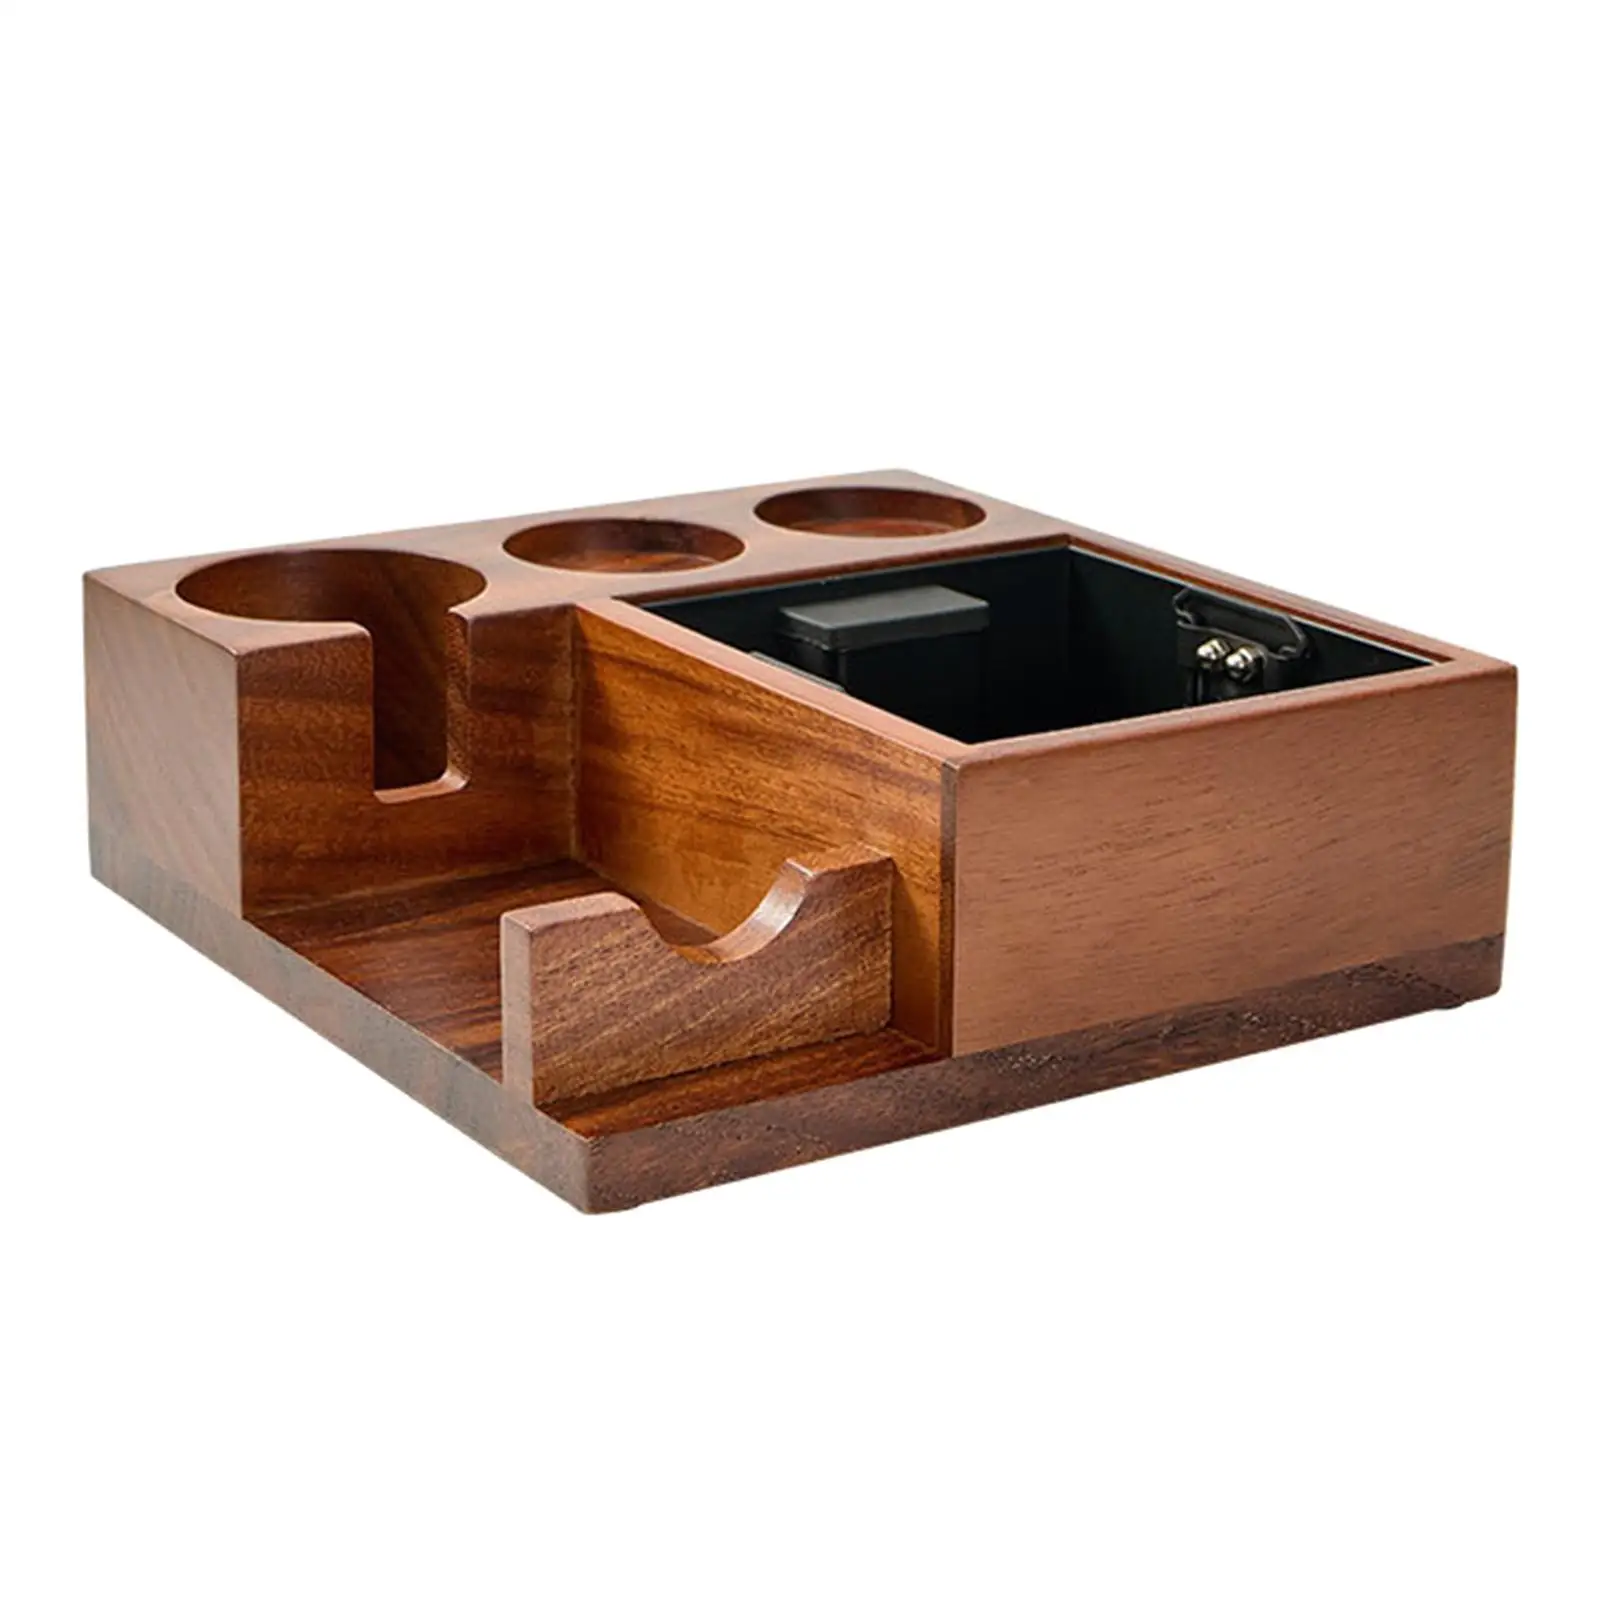 Coffee Grounds Box Tamper Mat Stand Storage Container for Bar Office